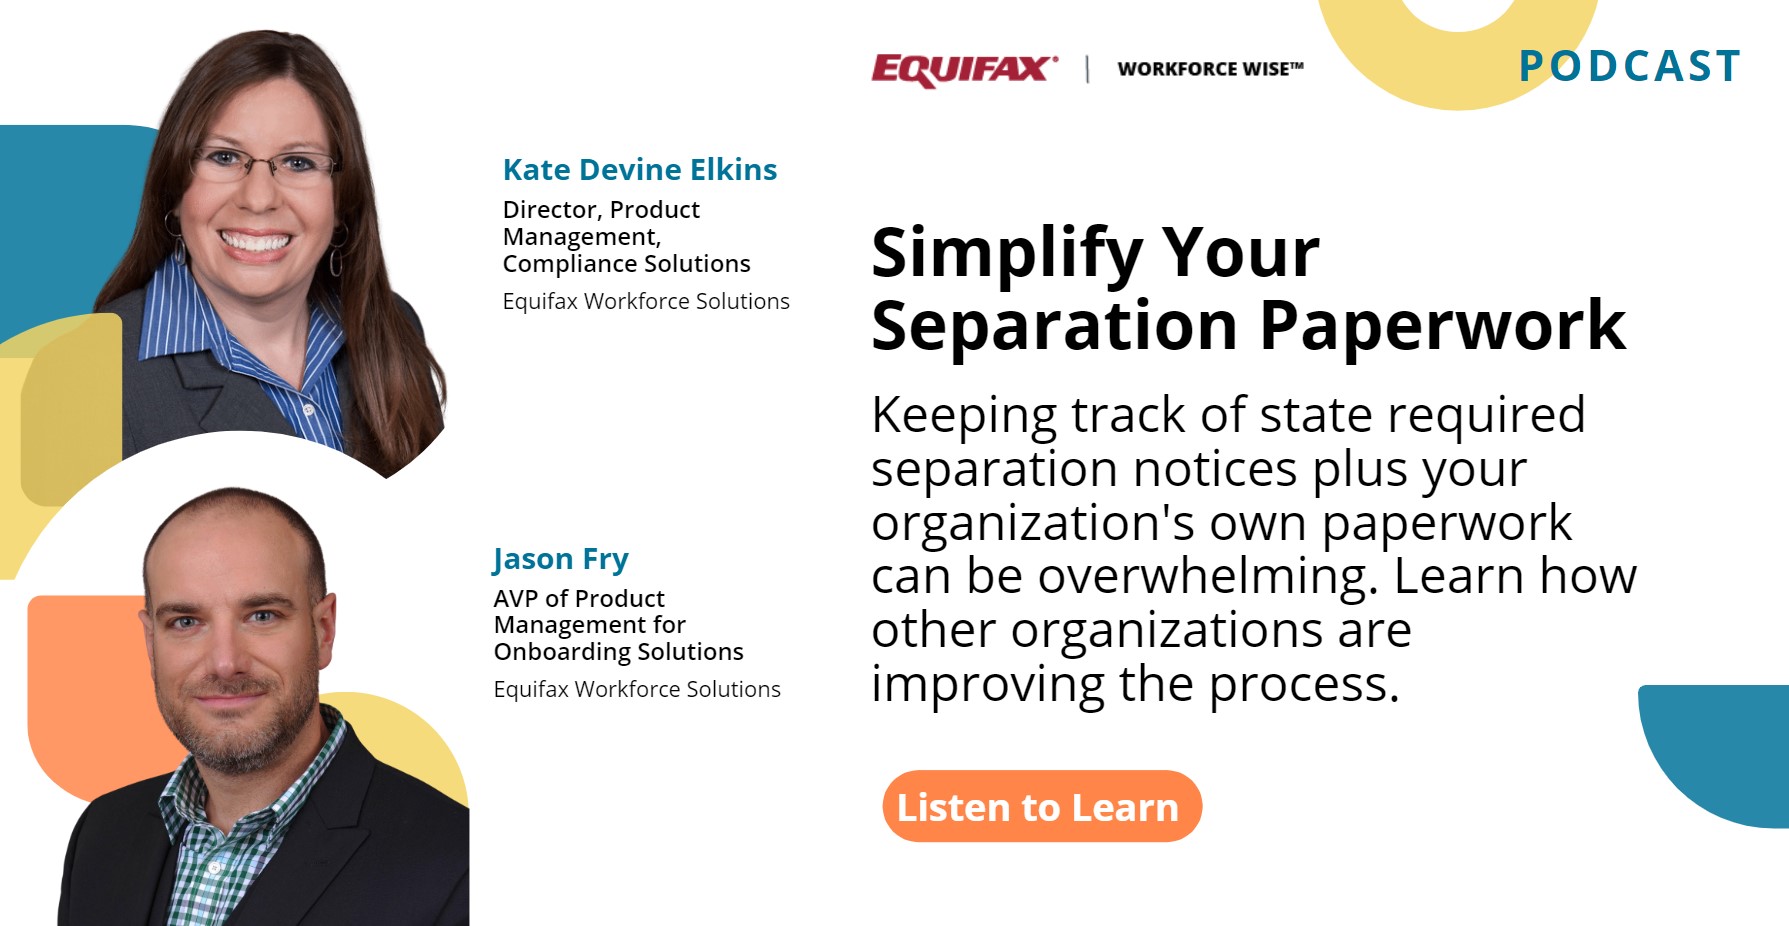 Podcast - Simplify Your Separation Paperwork - Episode 23